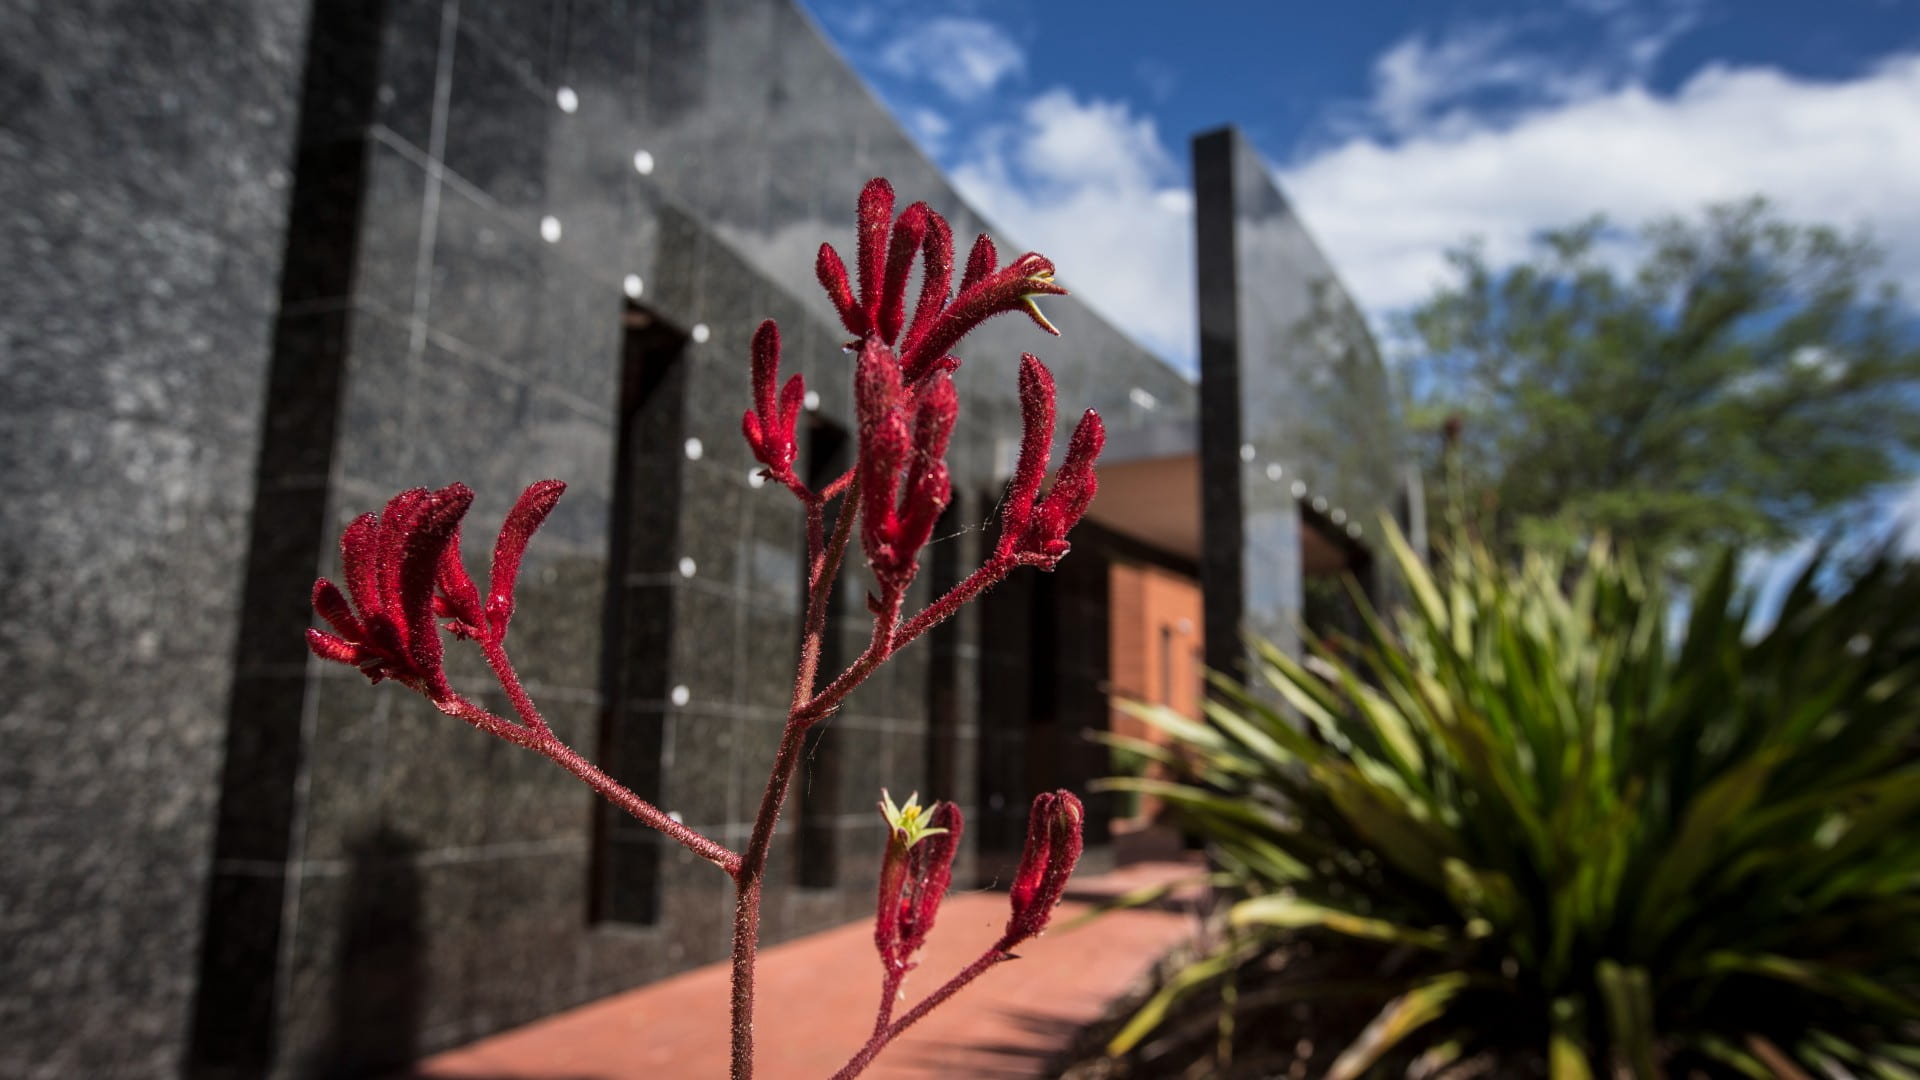 A picture of a red kangaroo paw plant with UOW Bega campus in the background.